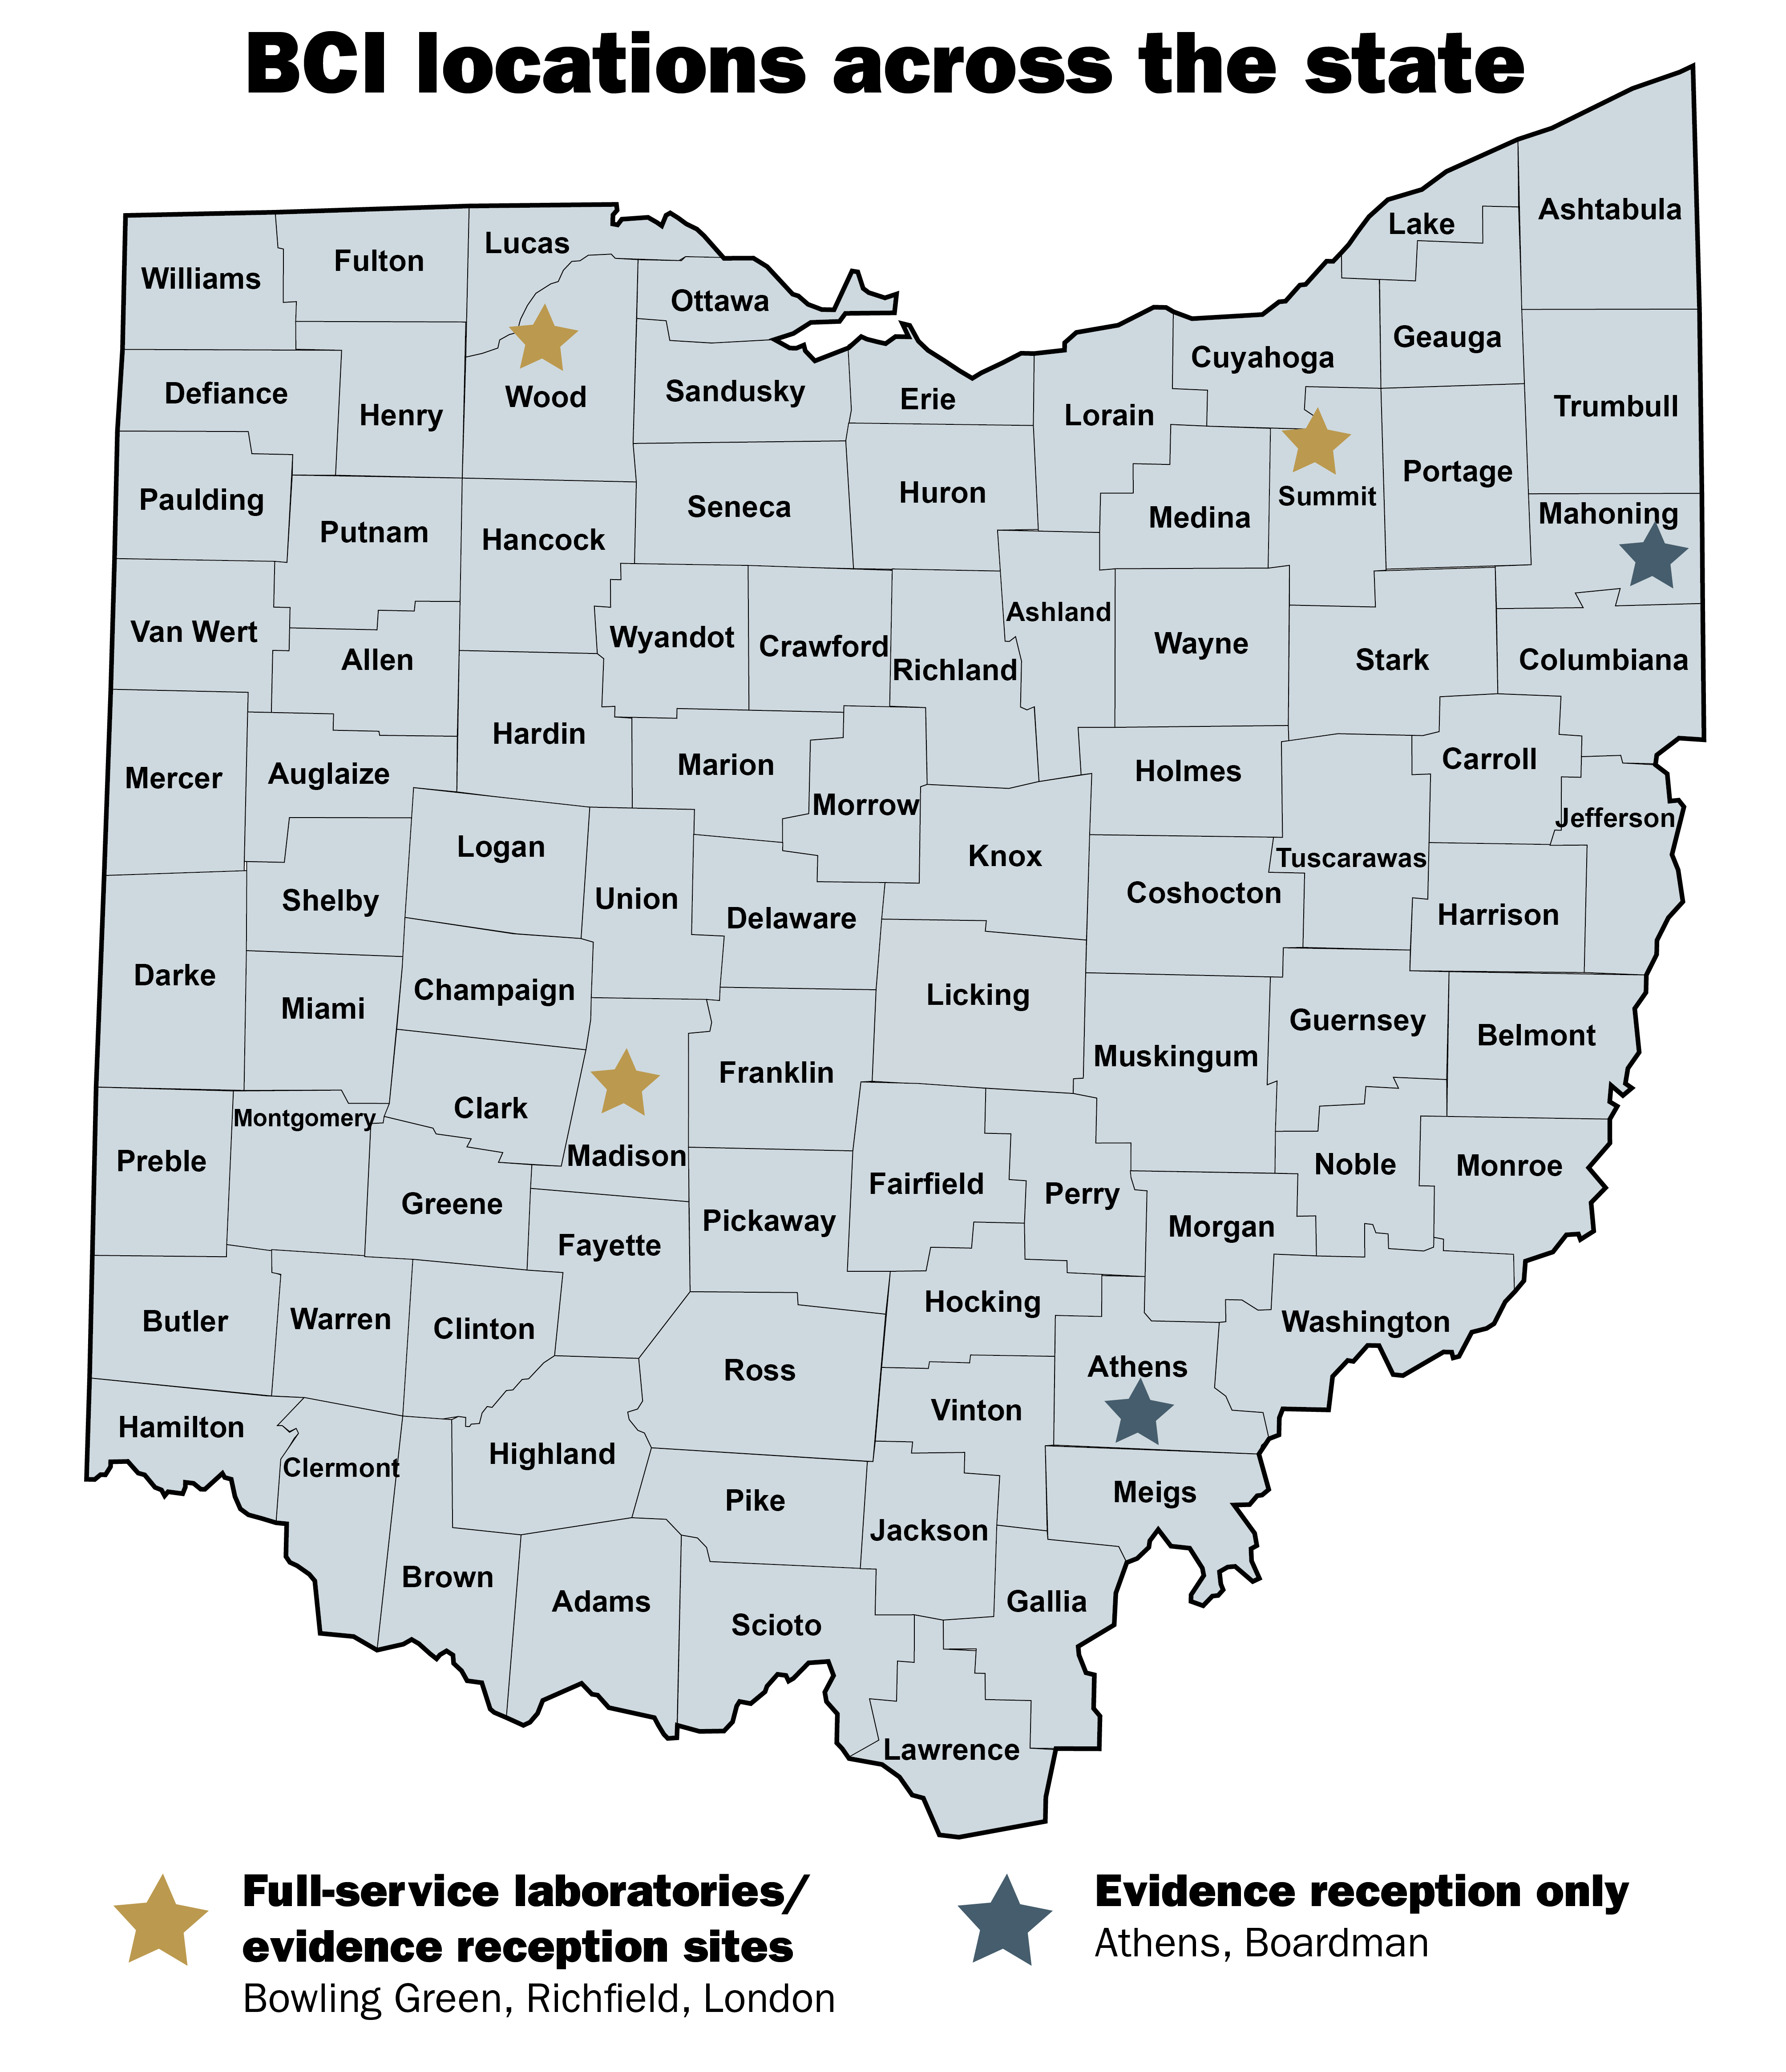 BCI locations across the state